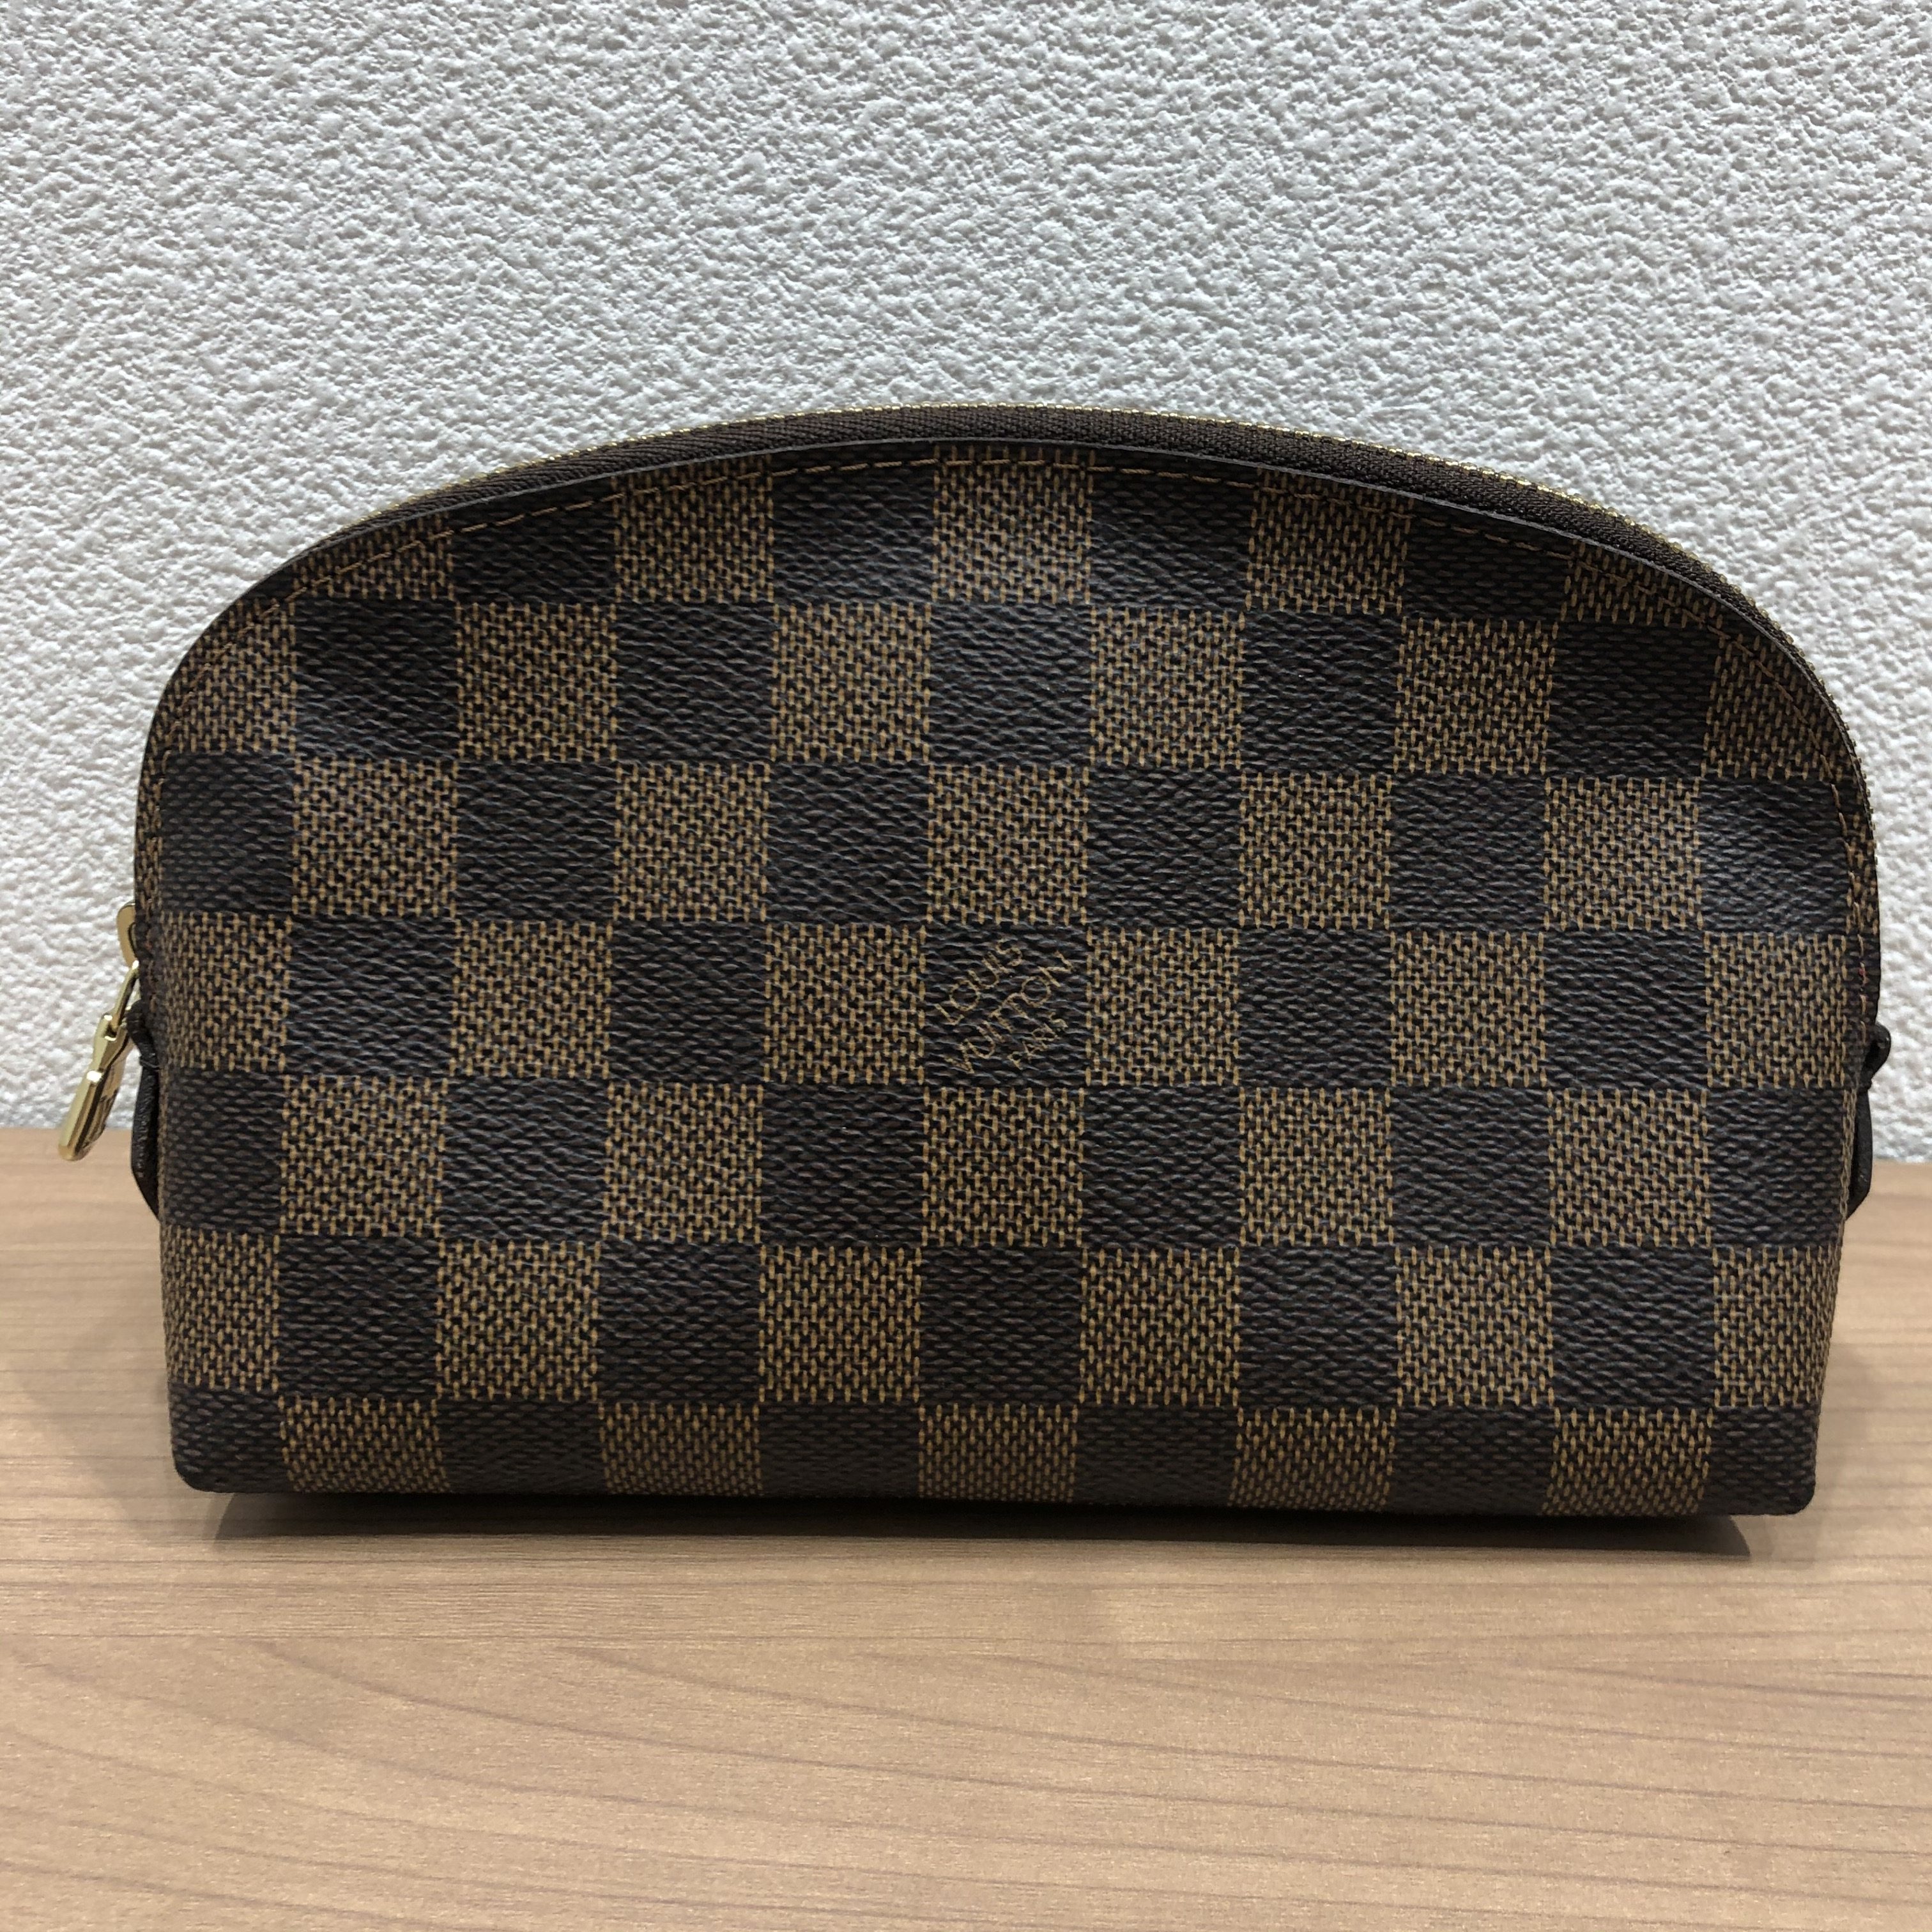 【LOUIS VUITTON/ルイヴィトン】ダミエ ポシェットコスメポーチ N47516